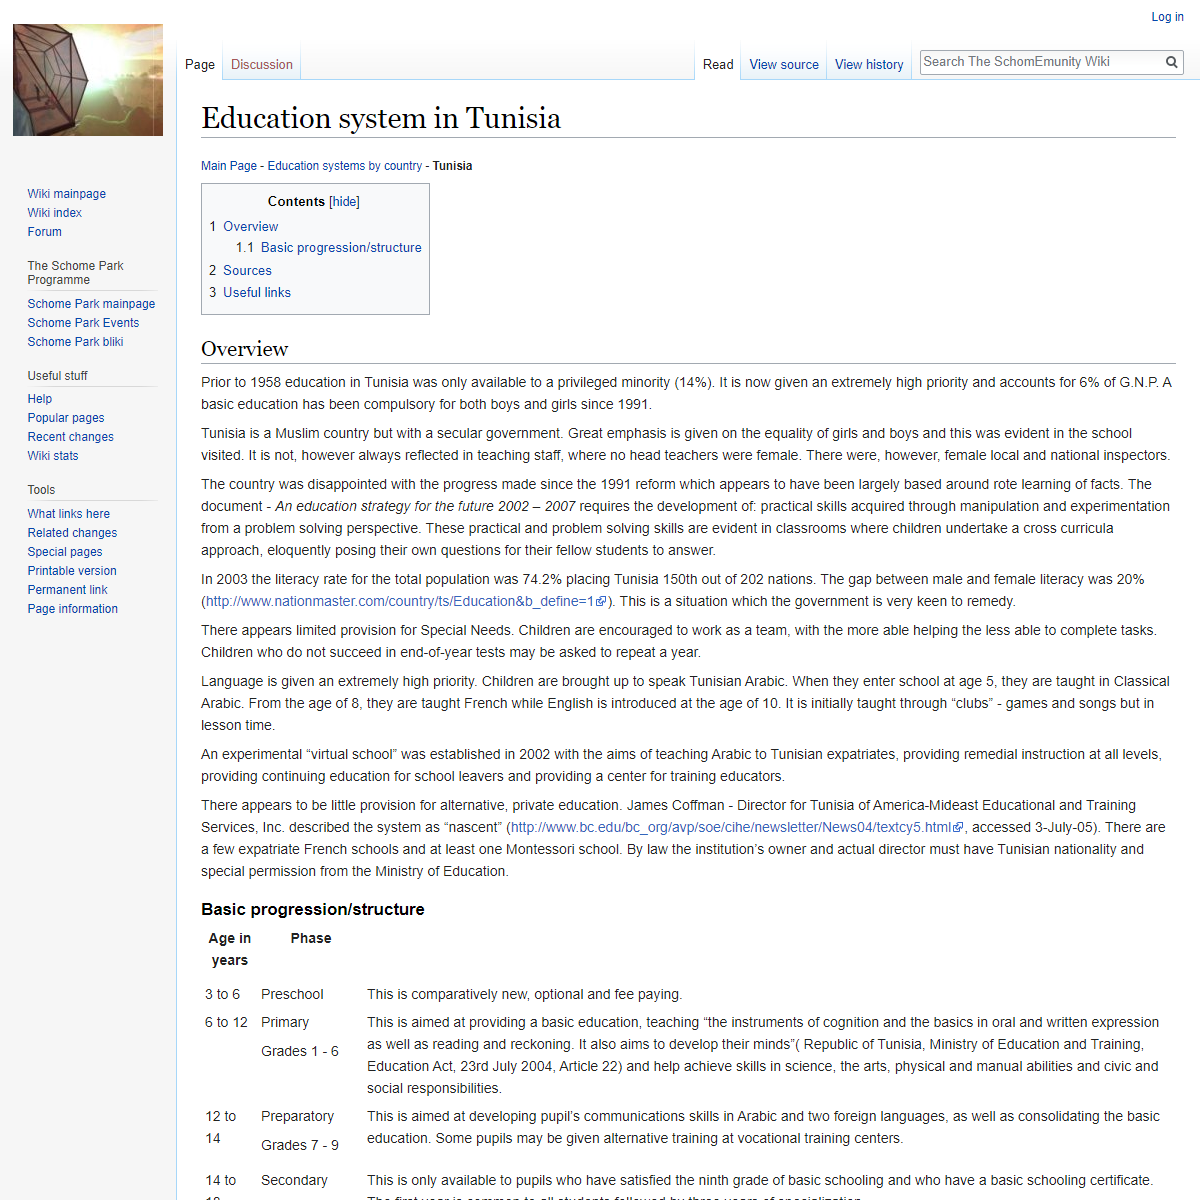 A complete backup of http://www.schome.ac.uk/wiki/Education_system_in_Tunisia